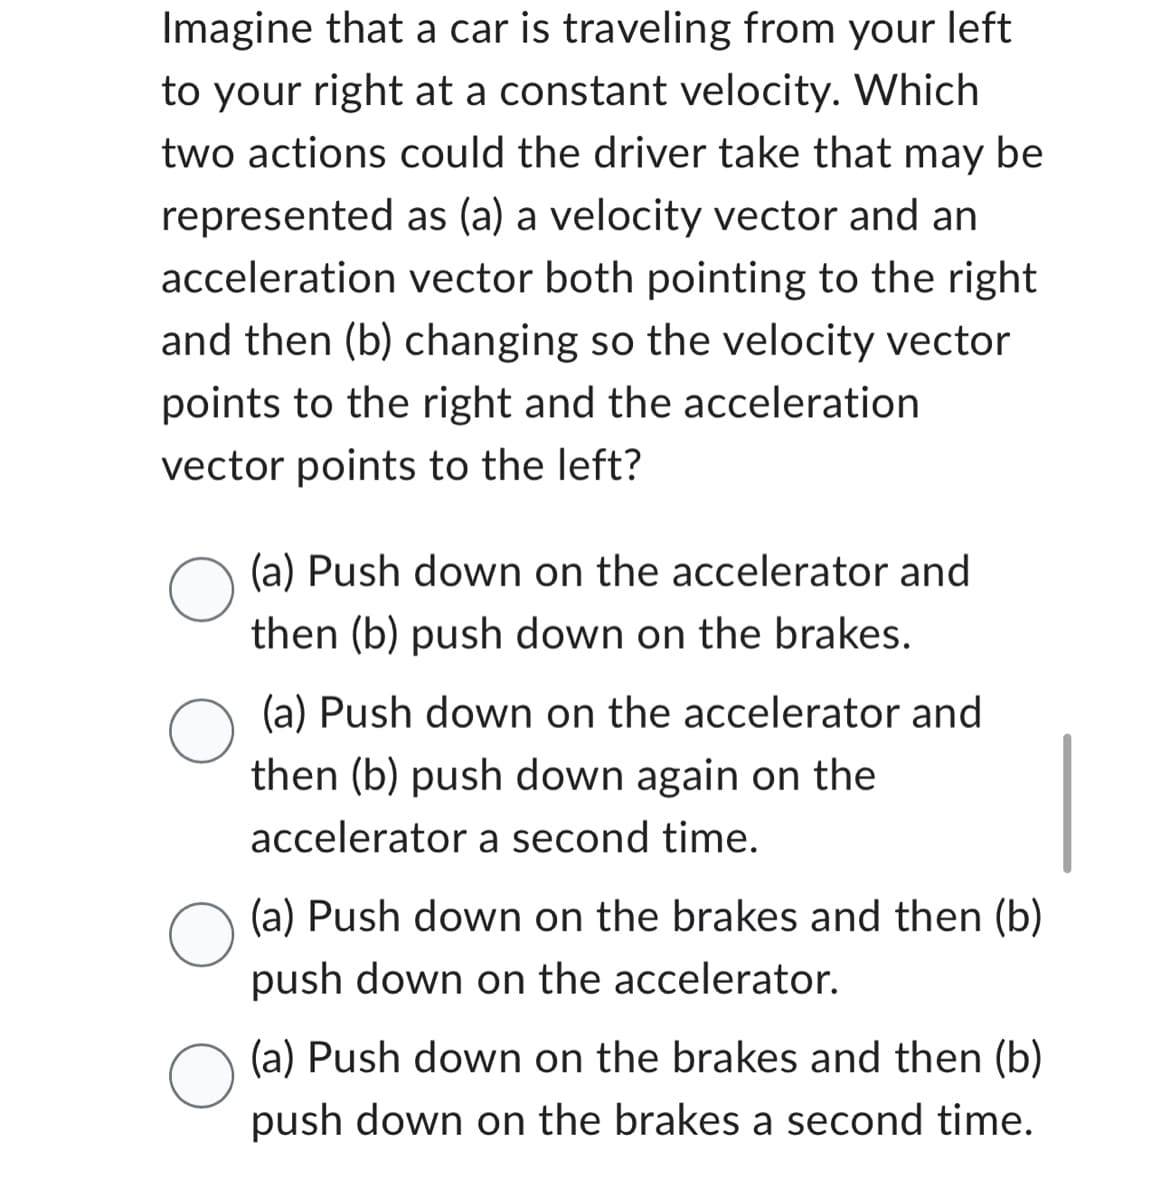 Imagine that a car is traveling from your left
to your right at a constant velocity. Which
two actions could the driver take that may be
represented as (a) a velocity vector and an
acceleration vector both pointing to the right
and then (b) changing so the velocity vector
points to the right and the acceleration
vector points to the left?
O(a) Push down on the accelerator and
then (b) push down again on the
accelerator a second time.
O
(a) Push down on the accelerator and
then (b) push down on the brakes.
O
(a) Push down on the brakes and then (b)
push down on the accelerator.
(a) Push down on the brakes and then (b)
push down on the brakes a second time.